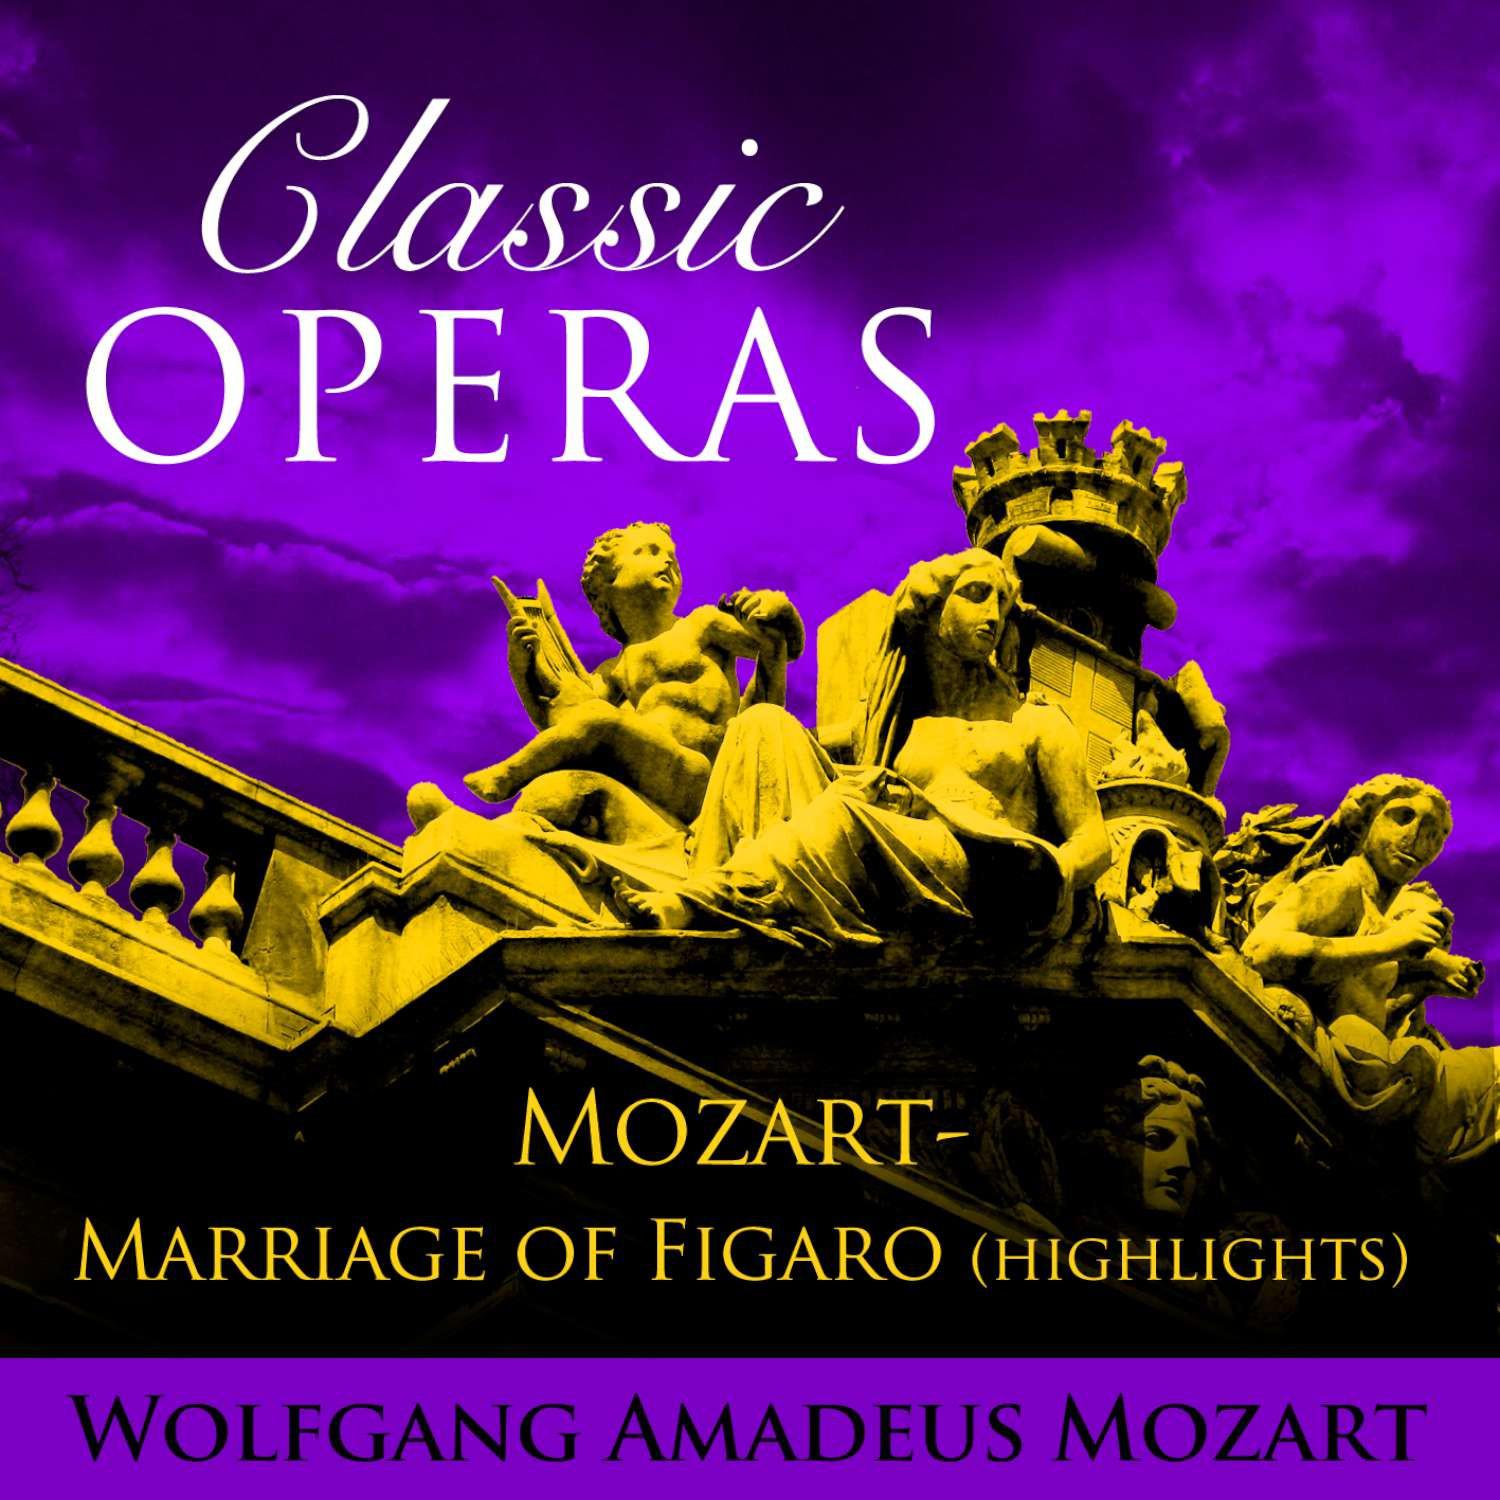 Classic Opera's - Mozart-Marriage of Figaro Highlights